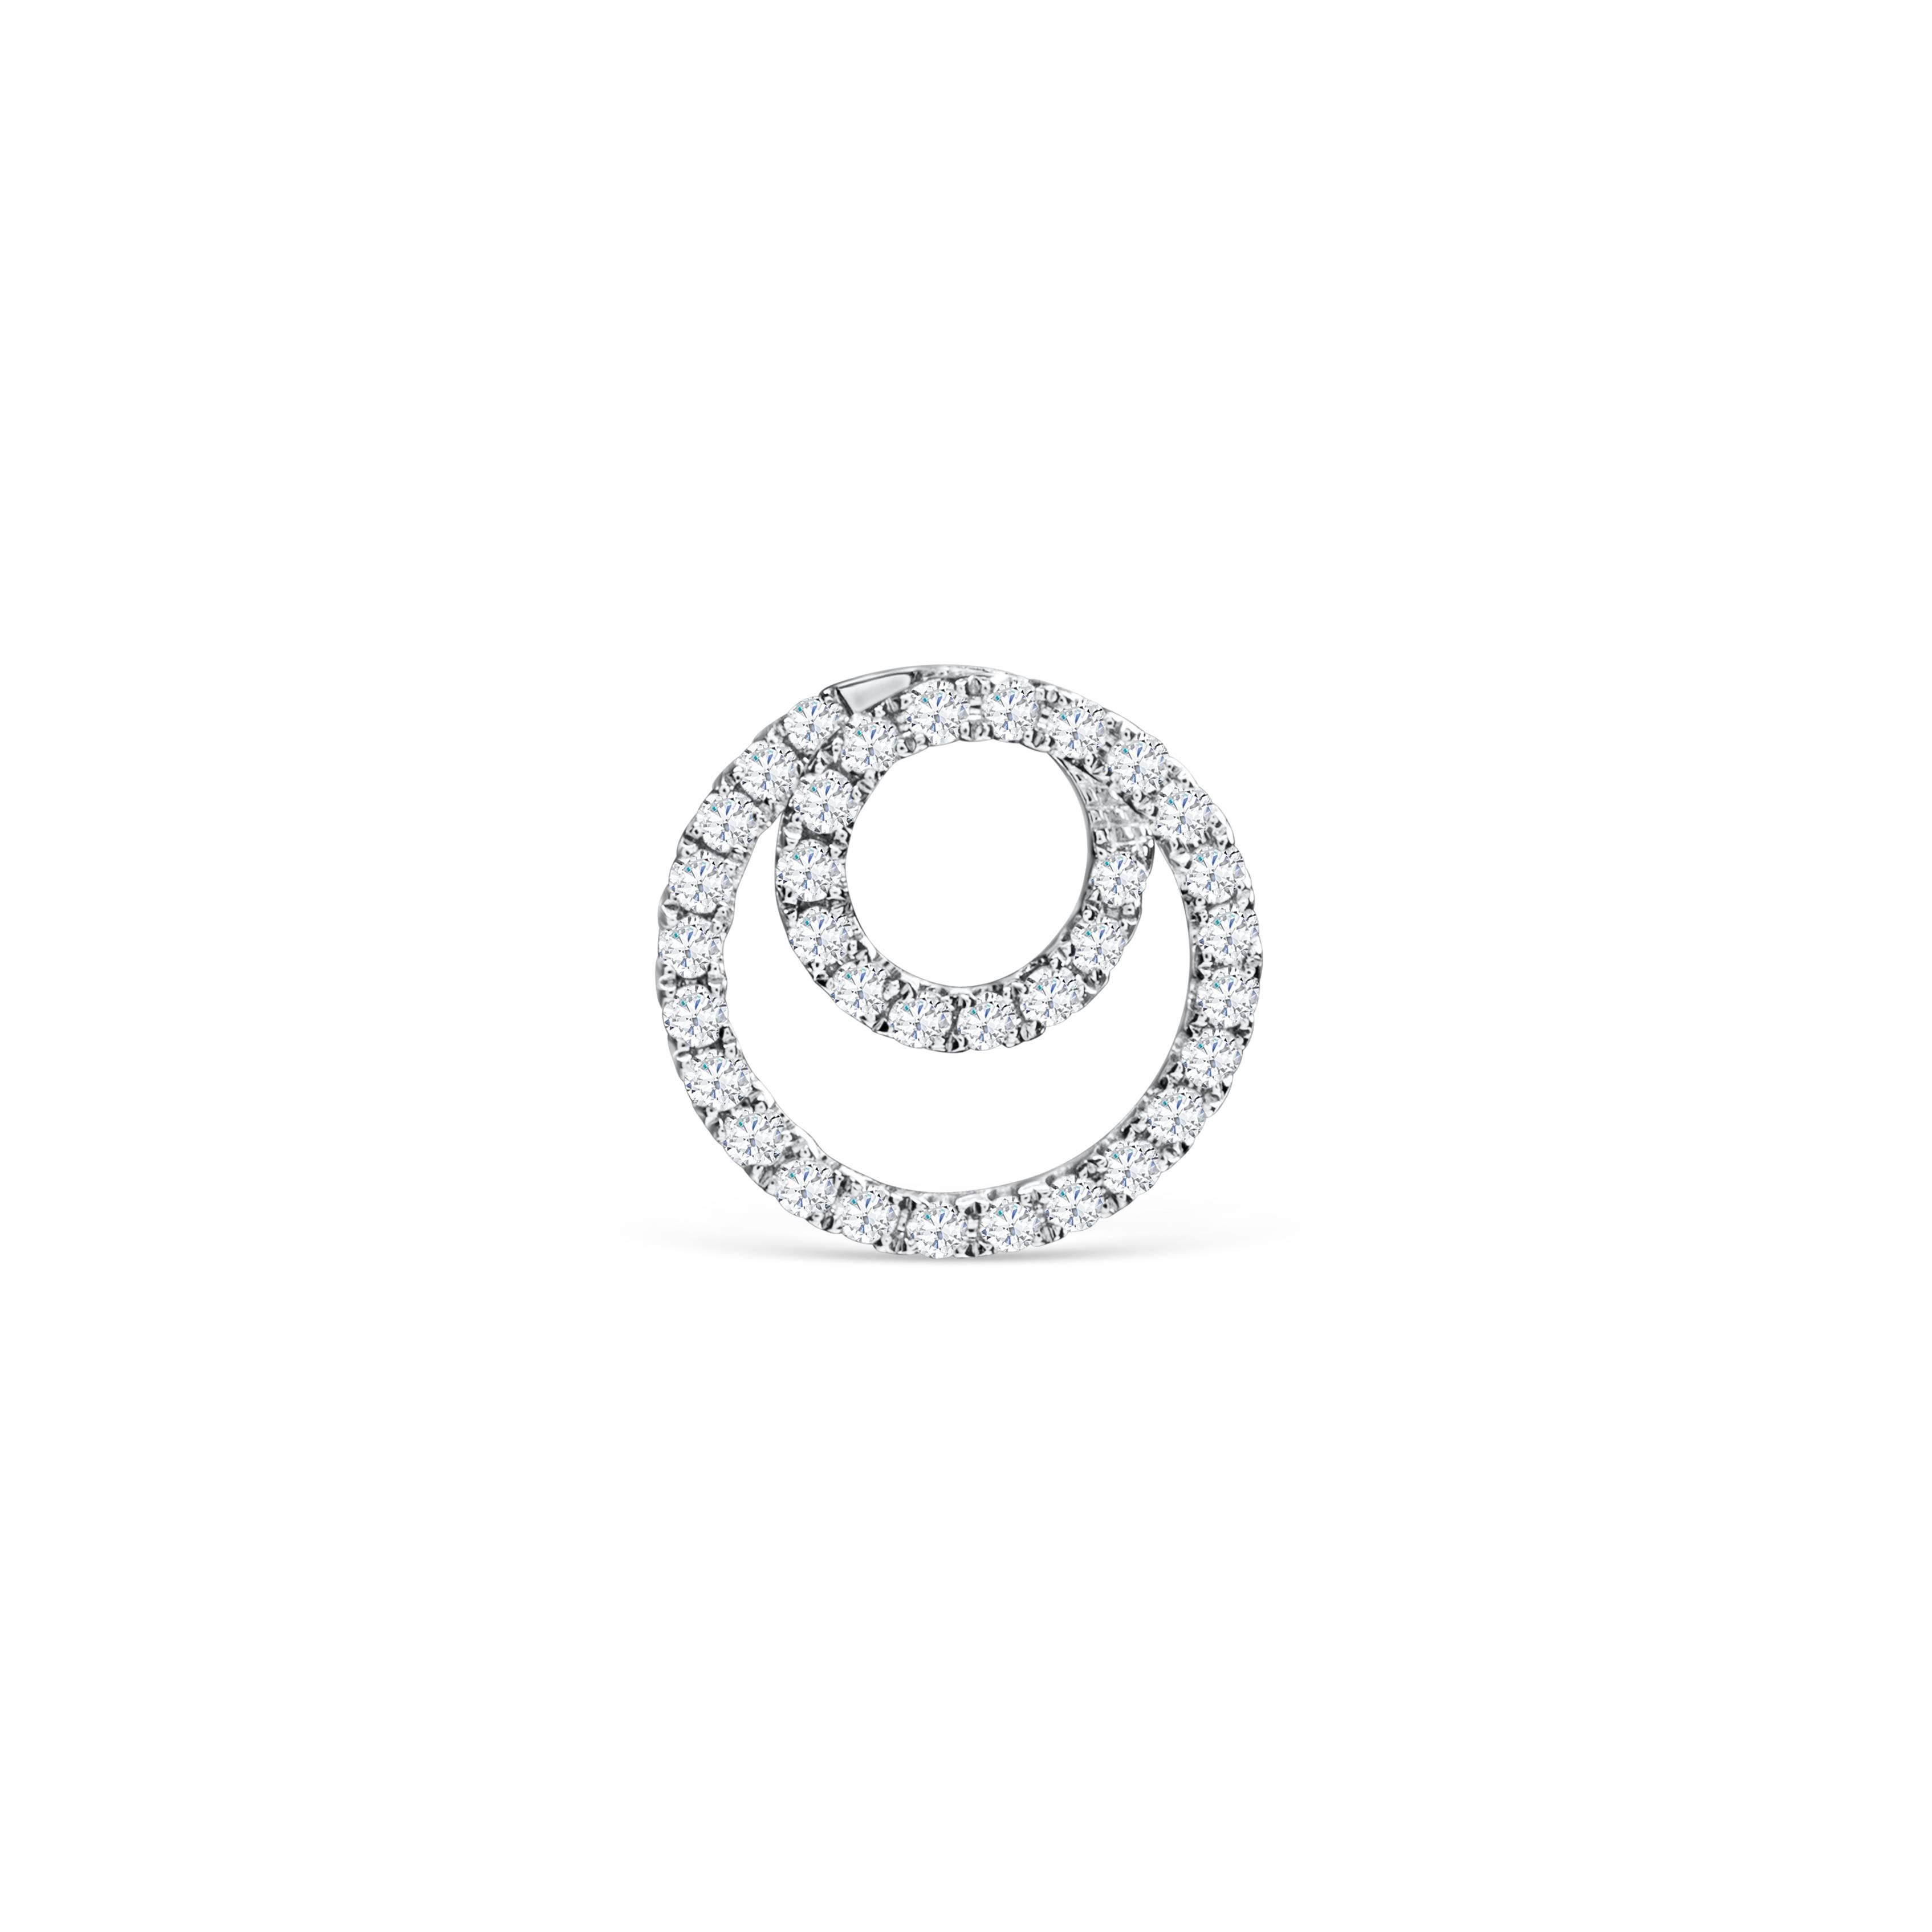 Each earring has an open work design consisting of a swirling line embellished in sparkling round diamonds. The diamonds weigh 0.68 carats total. Made in 18k white gold. Has post. 

Style available in different price ranges. Prices are based on your